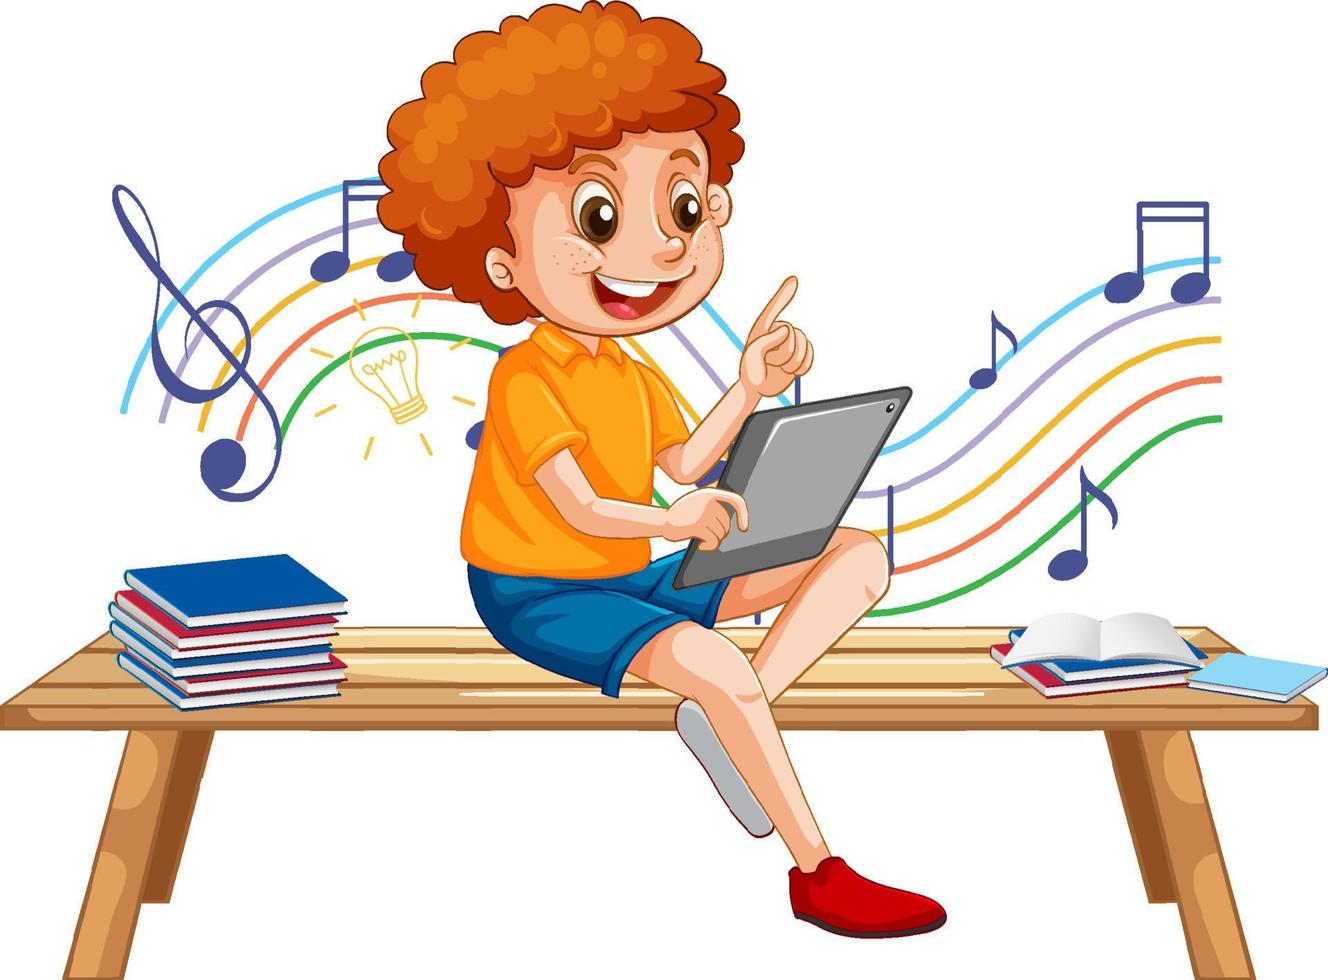 Boy sitting on bench learning from tablet vector